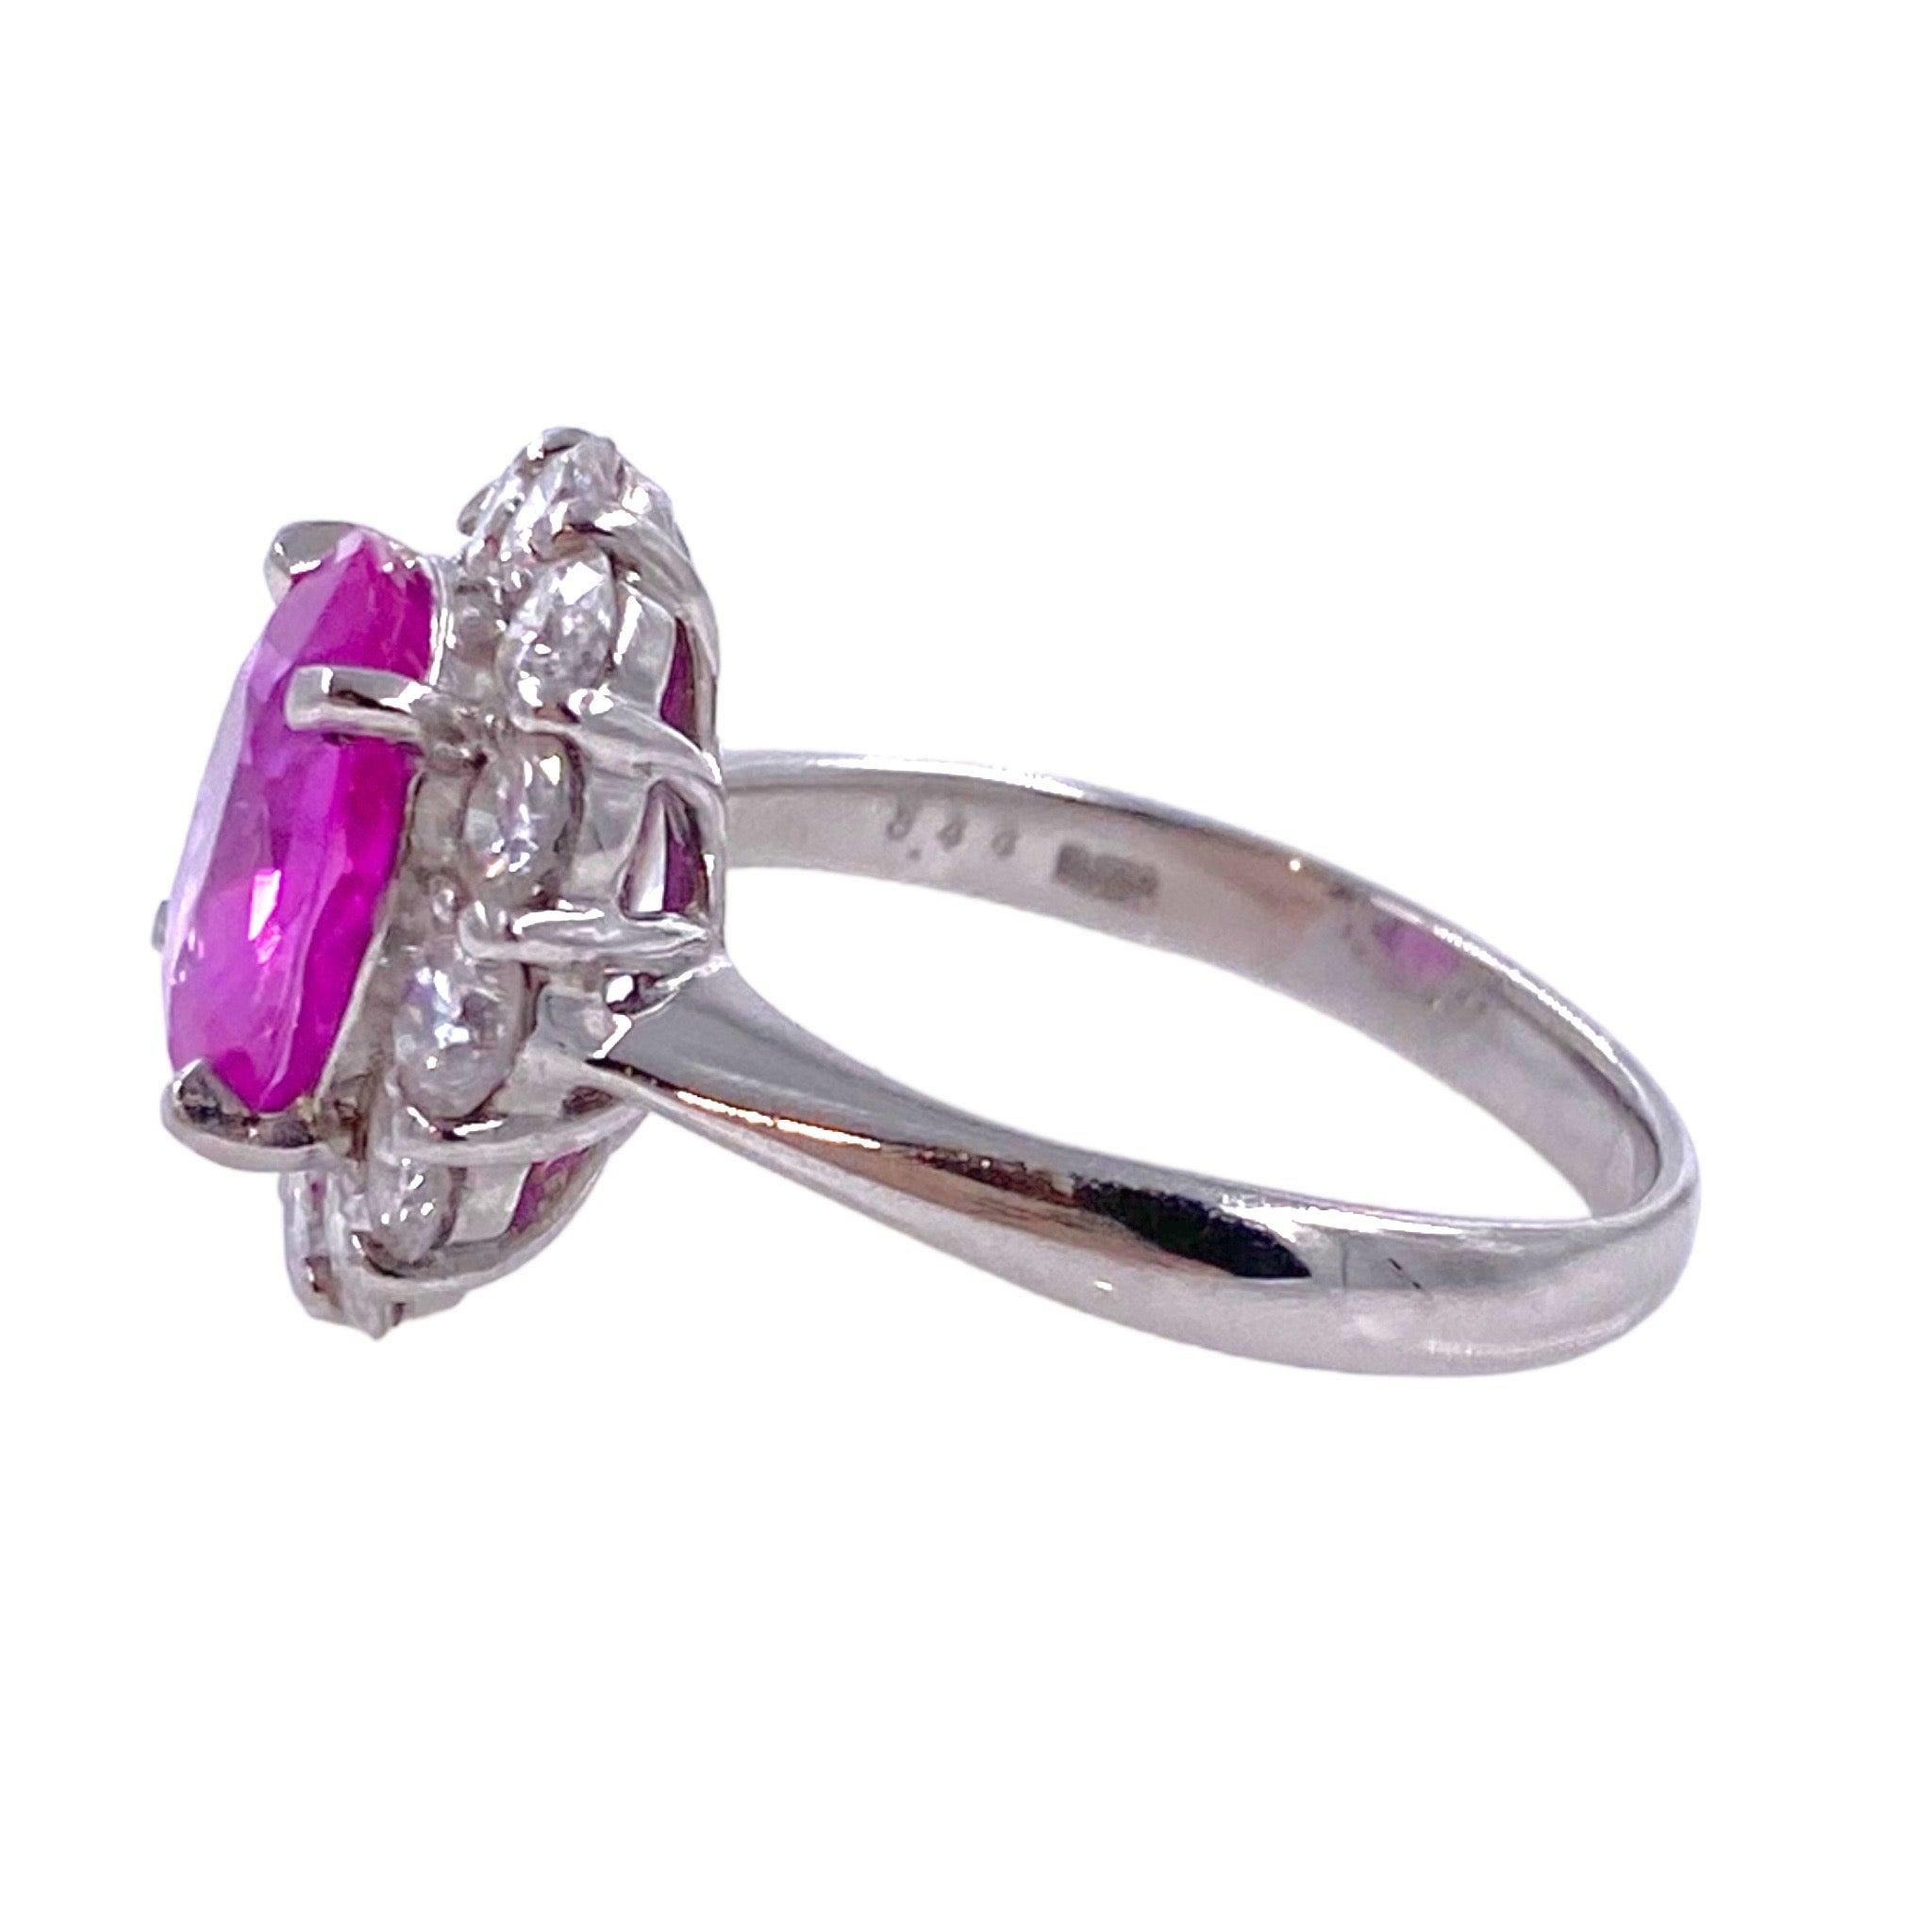 Crafted in platinum, the ring features an oval pink sapphire solitaire framed by diamonds in this simple yet elegant design. The contrast between the color of the center stone and diamonds elevates the beauty of the ring. 
Pink Sapphire: 3.44ct. GRS